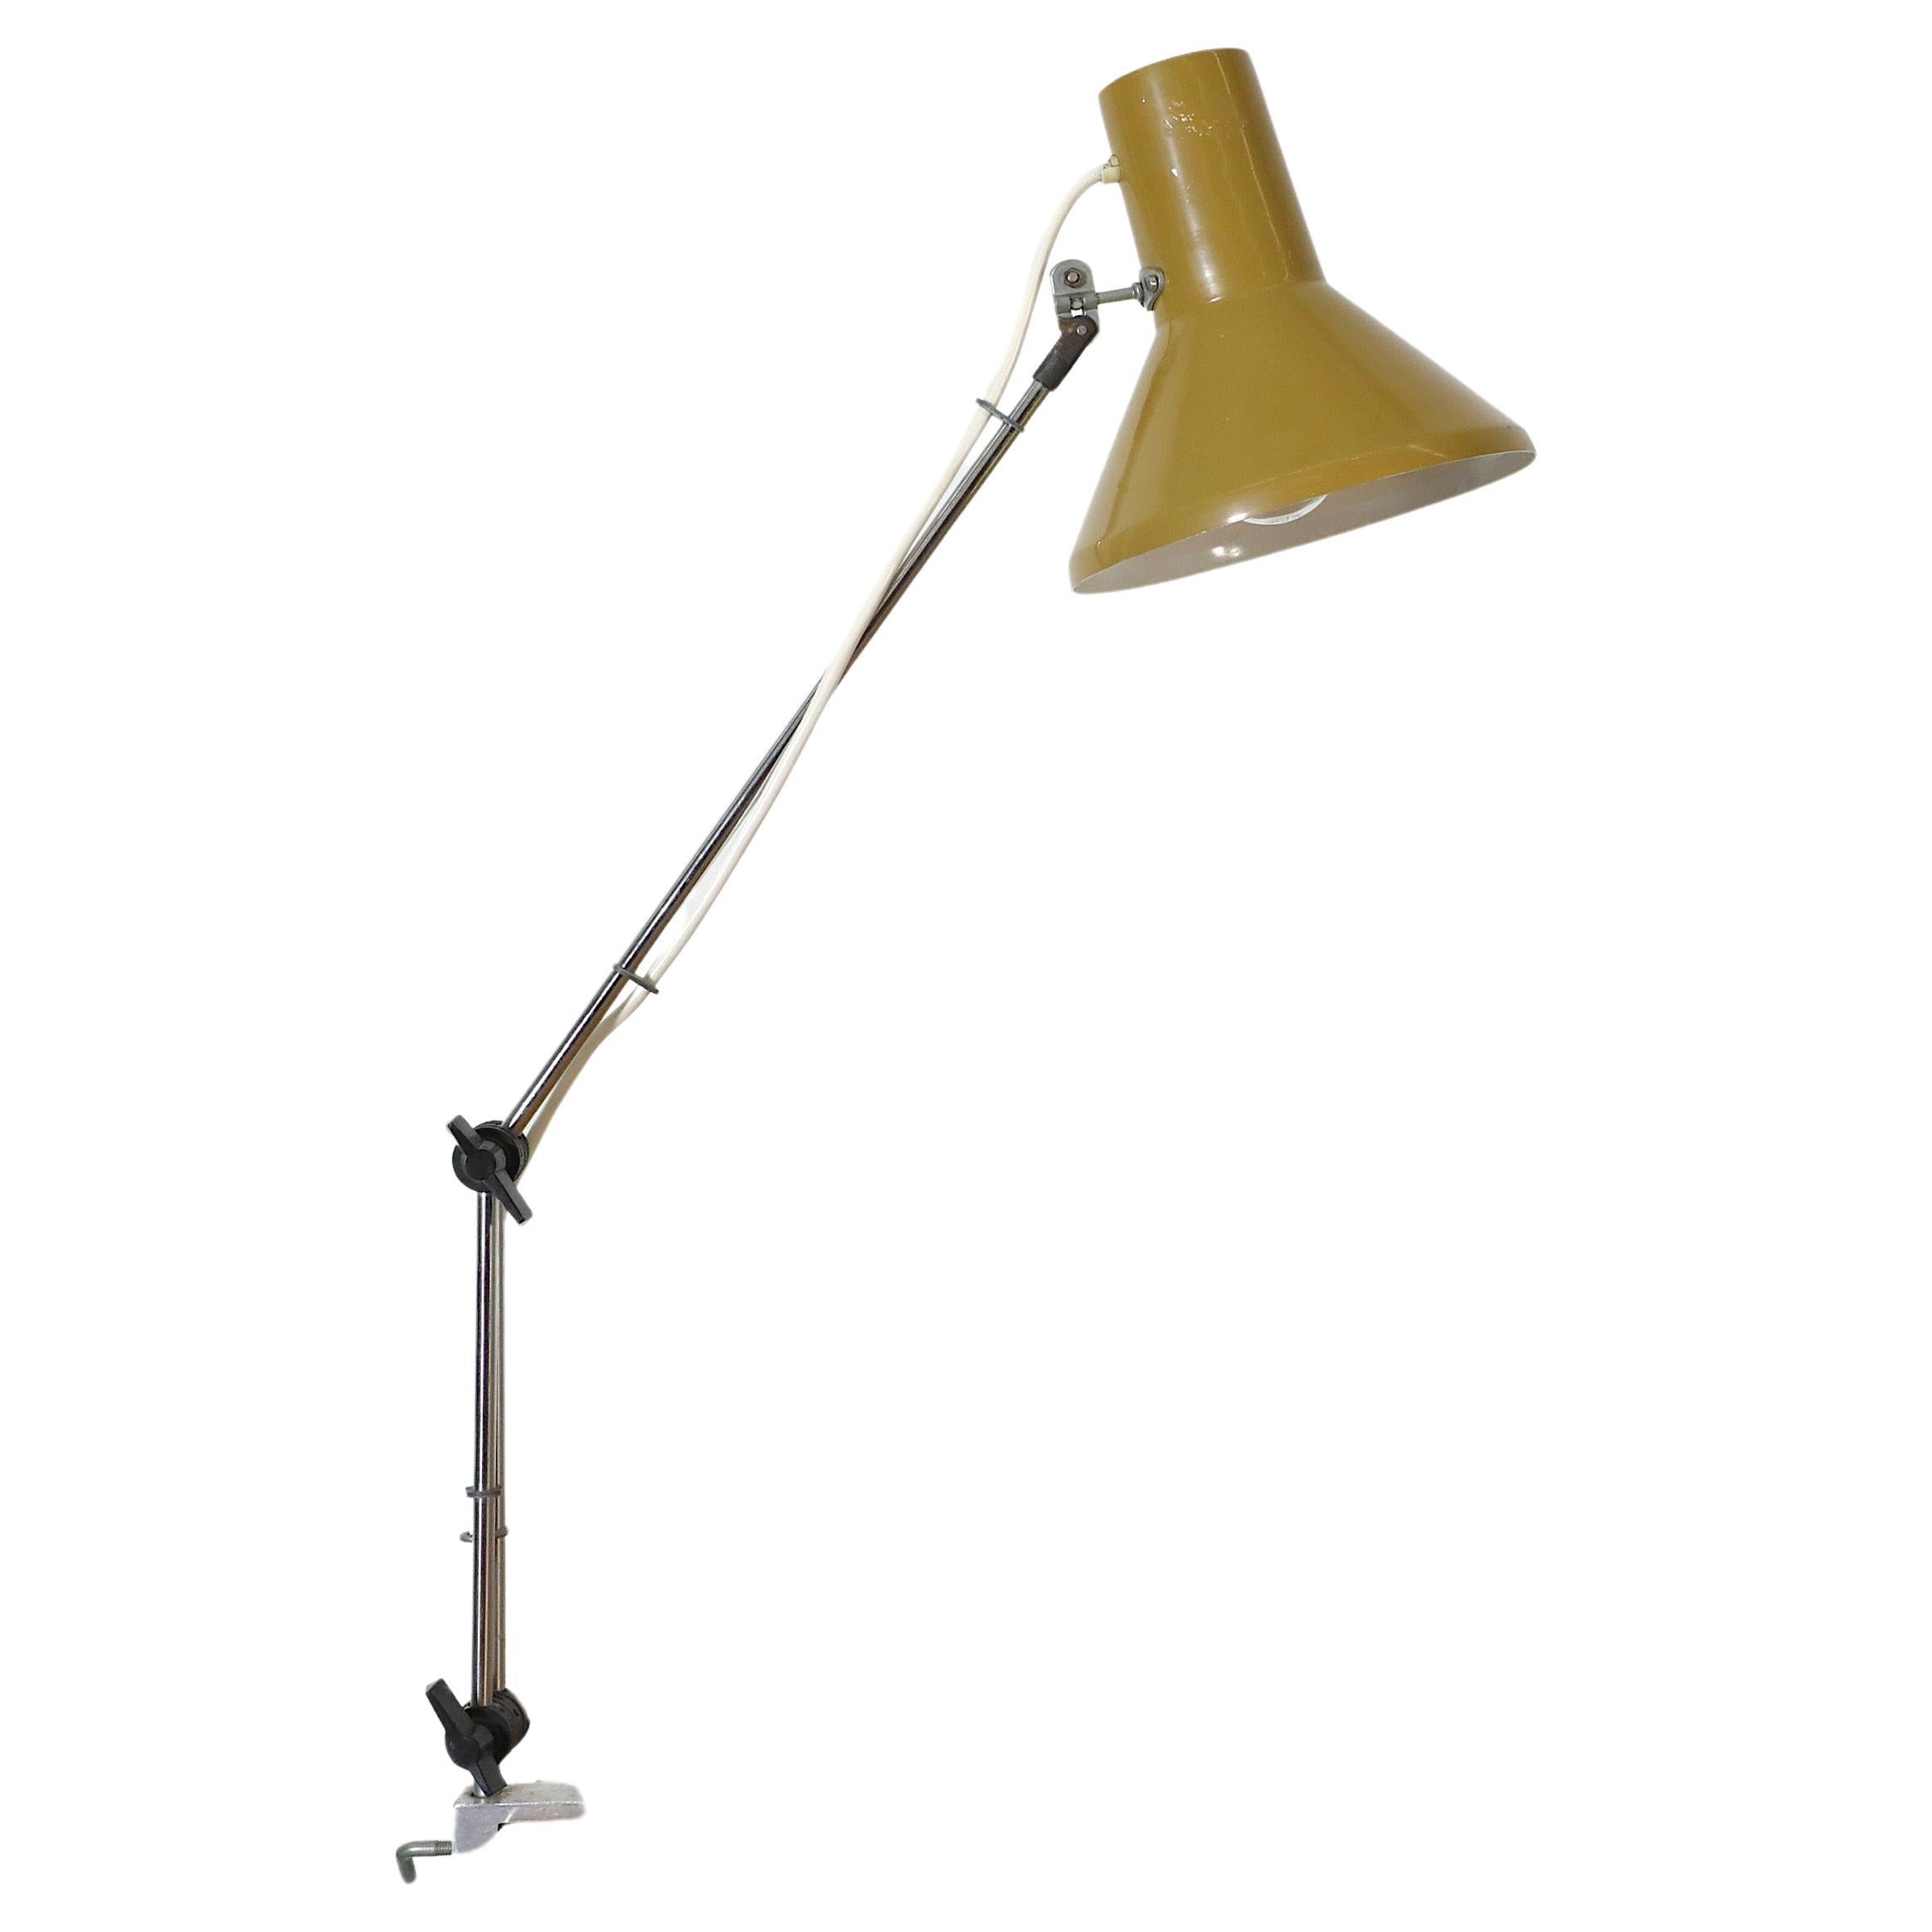 Szarvasi Hala Style Industrial Drafting Clamp-on Lamp with Olive Green Shade